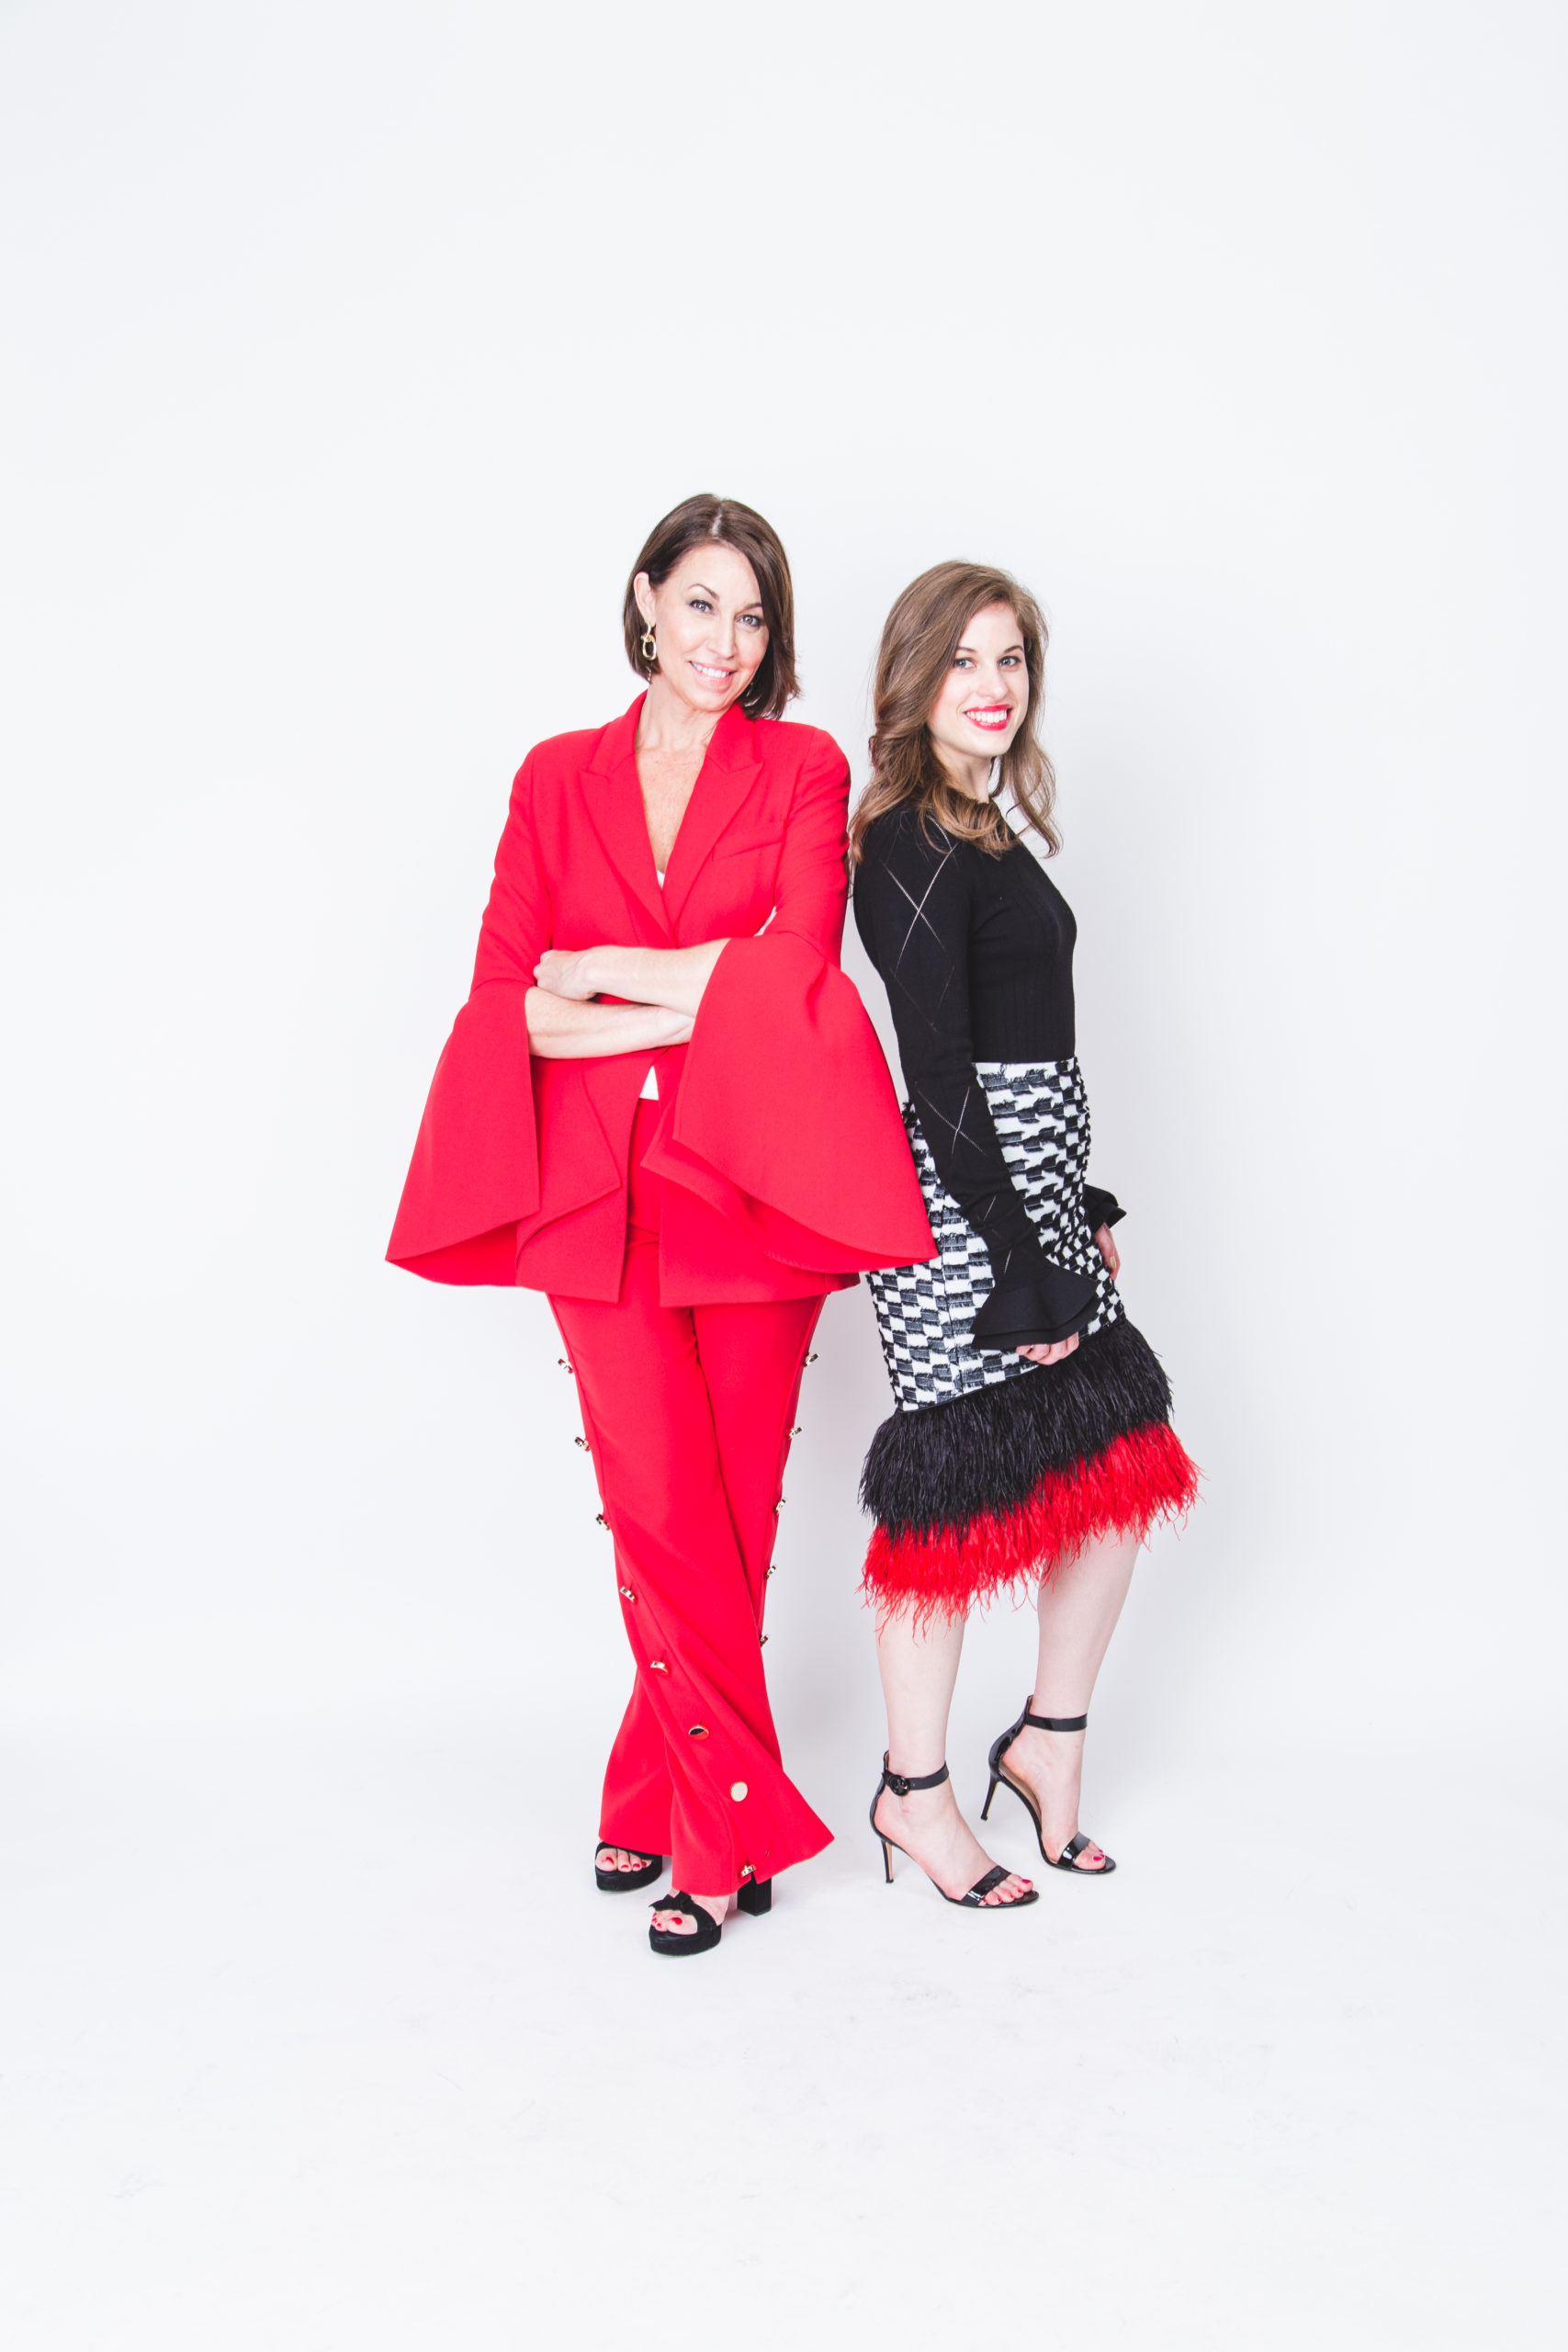 Stylish mother daughter duo dressed in red, black & white on set at a photoshoot. Wearing black heels